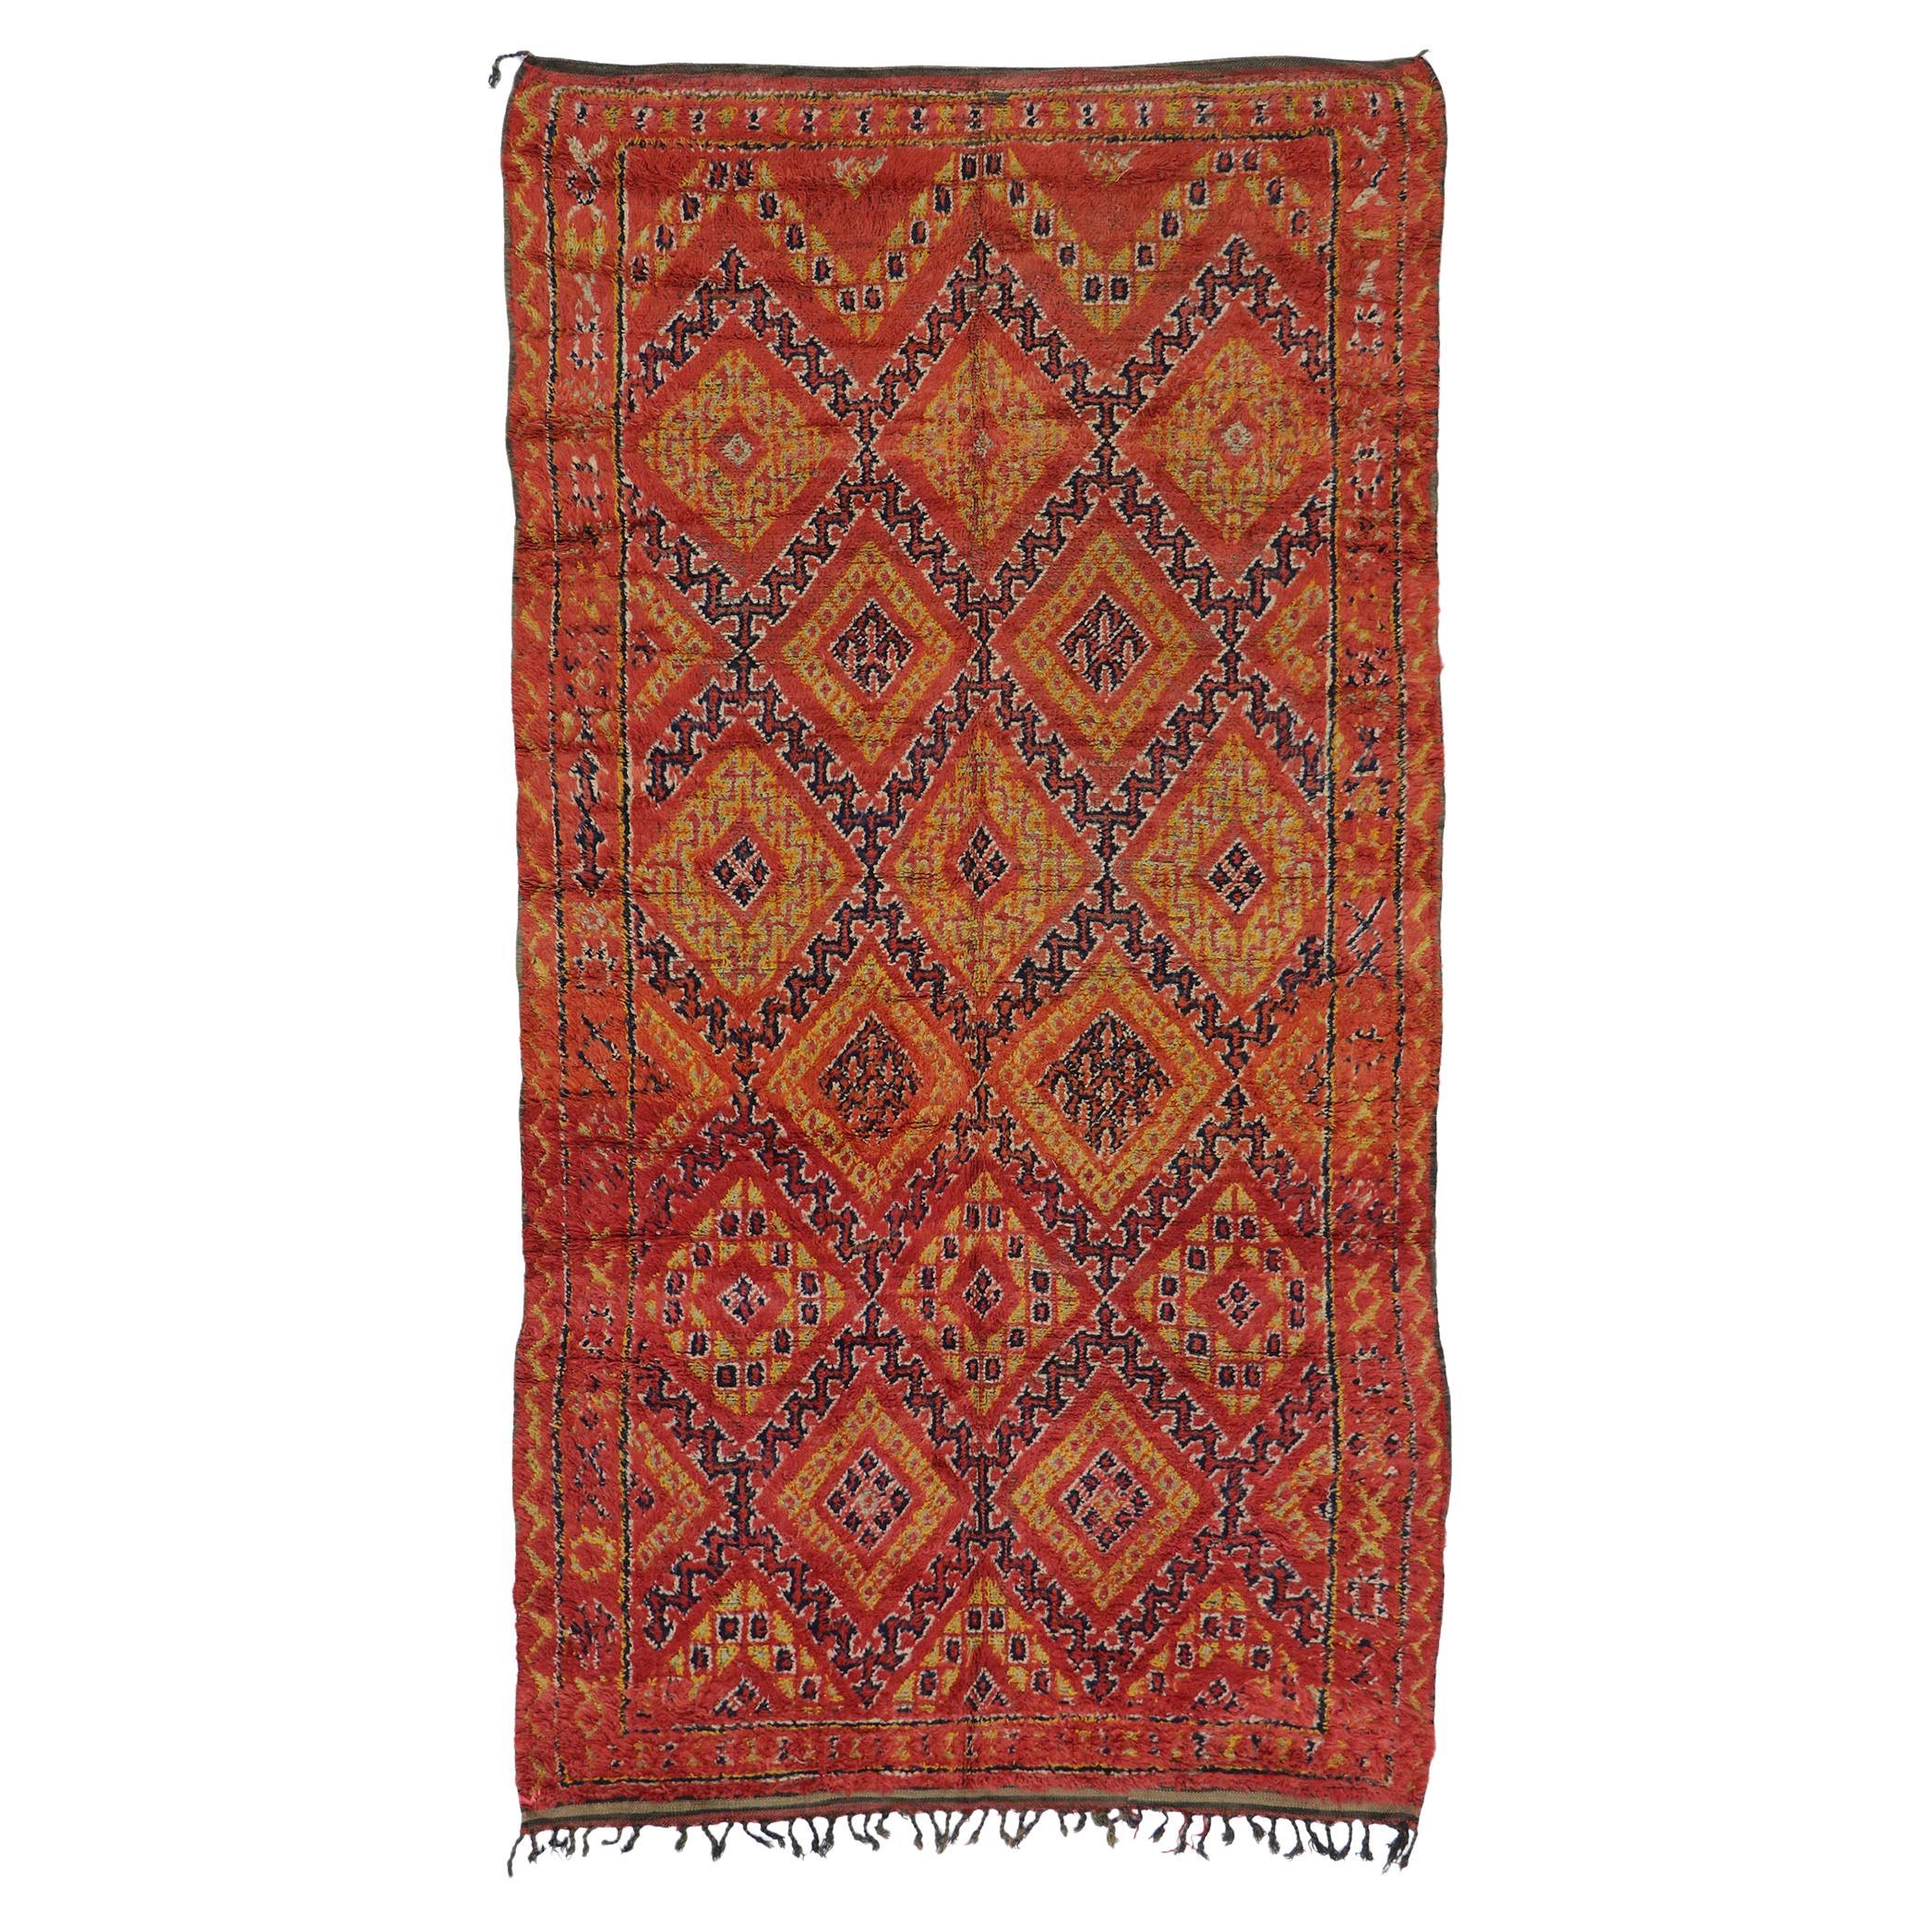 Vintage Berber Red Beni M'Guild Moroccan Rug with Tribal Style